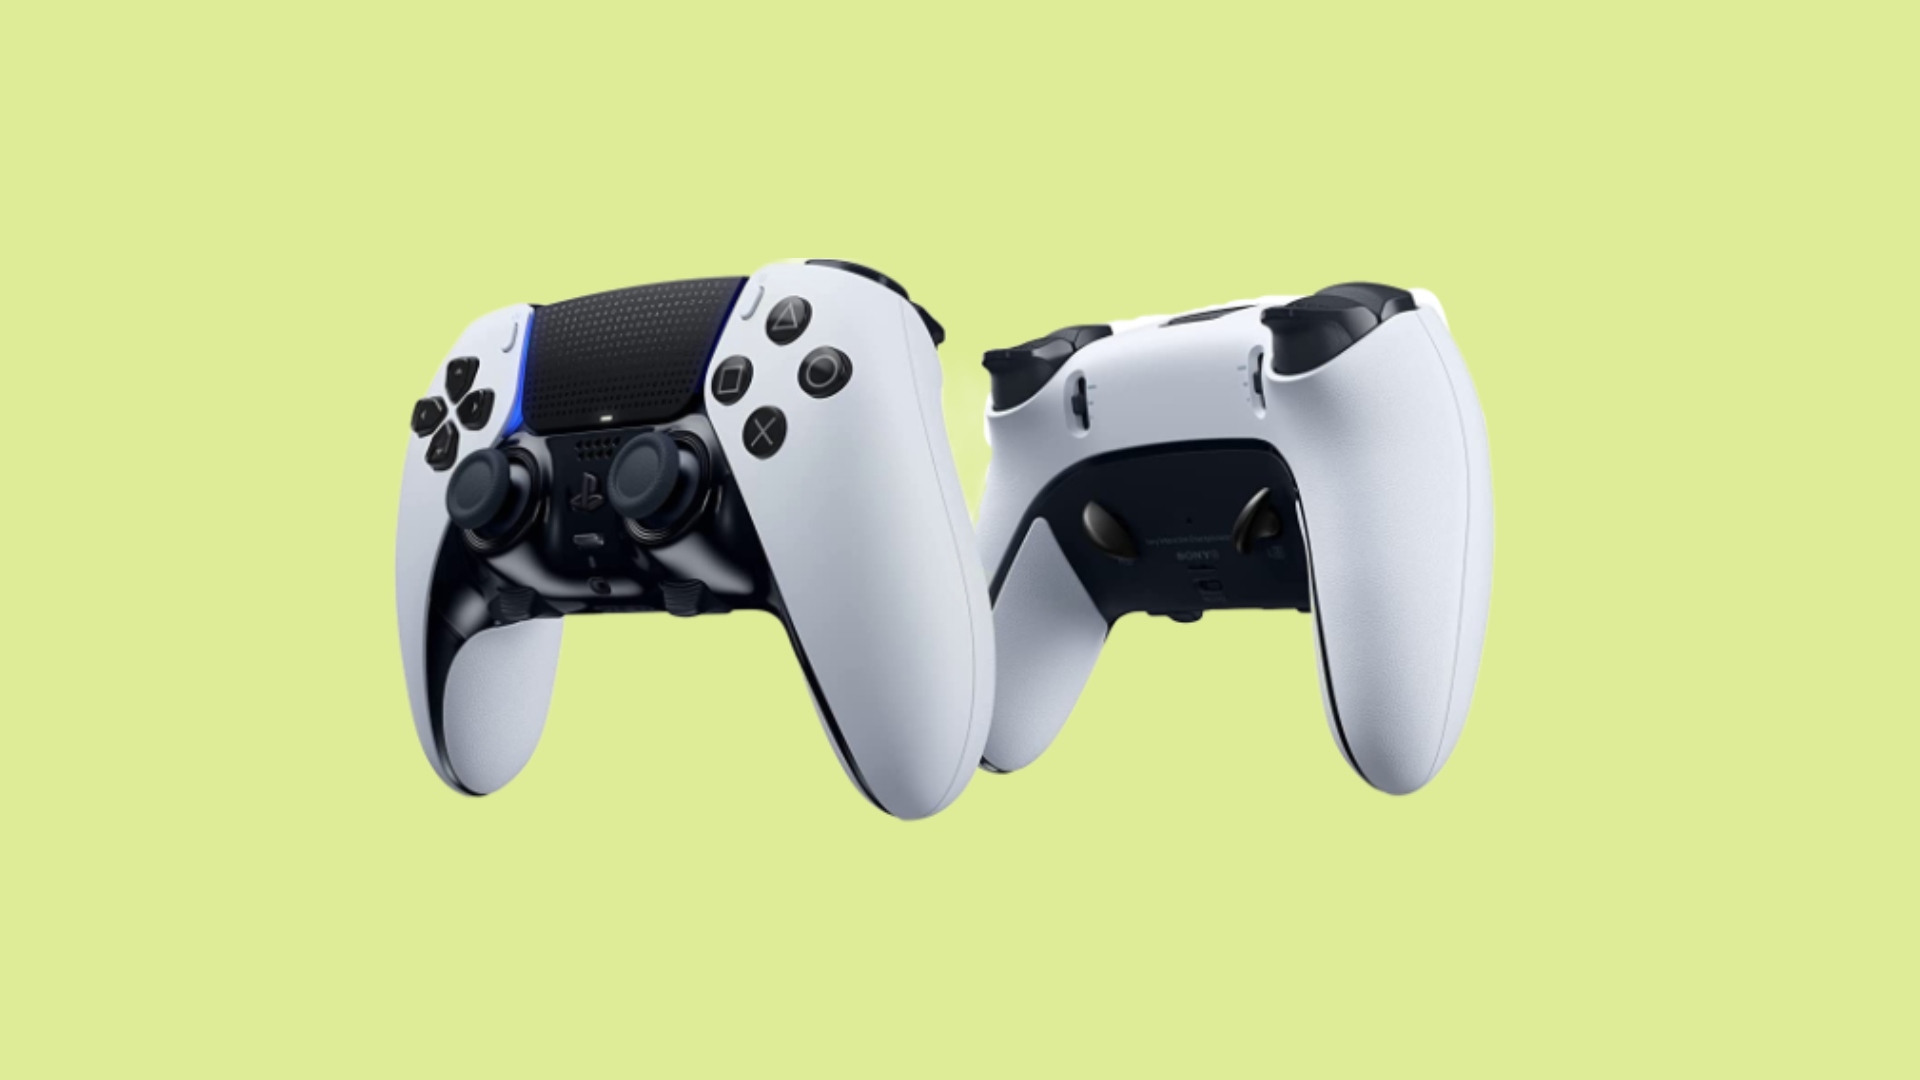 PS5 DualSense vs Xbox Gamepad: Which is the better controller for